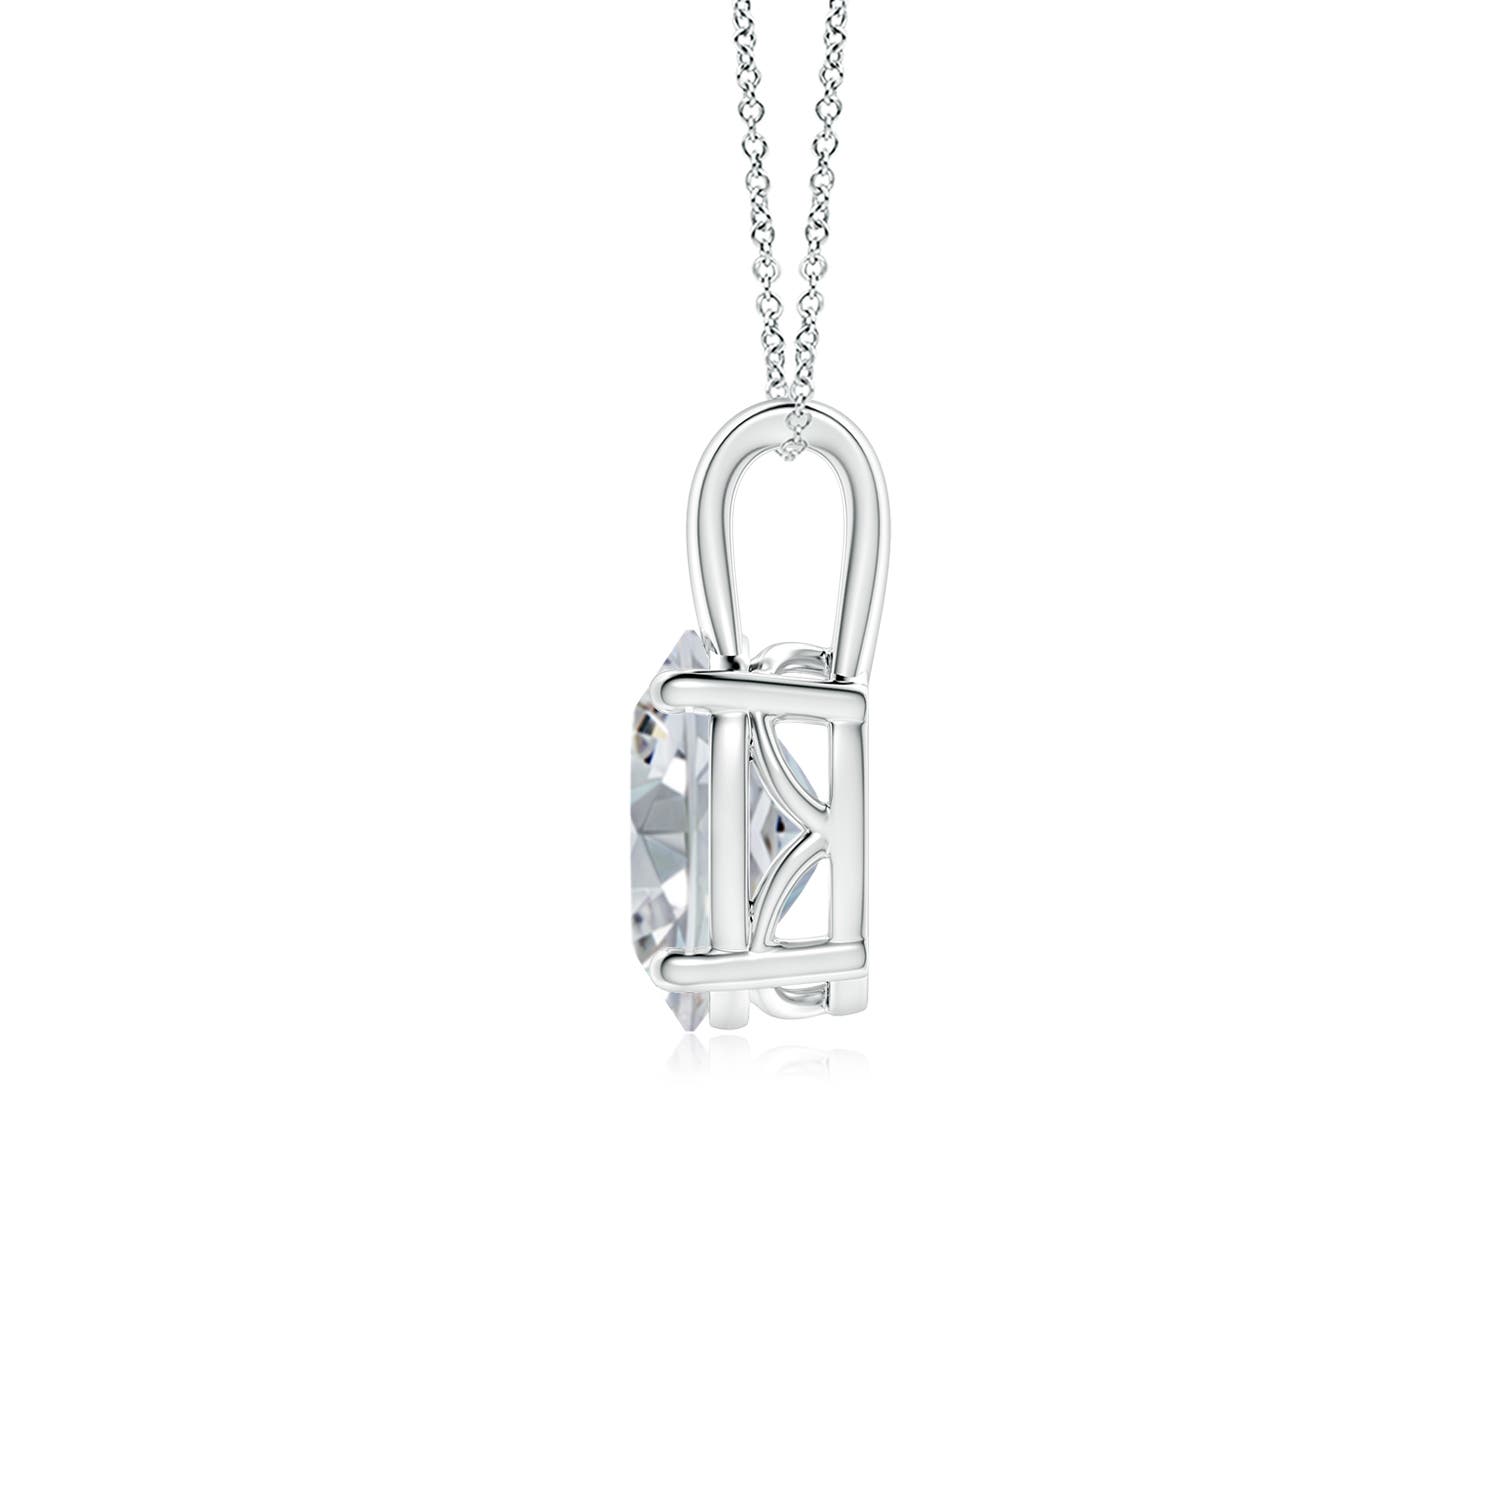 H, SI2 / 1.5 CT / 18 KT White Gold